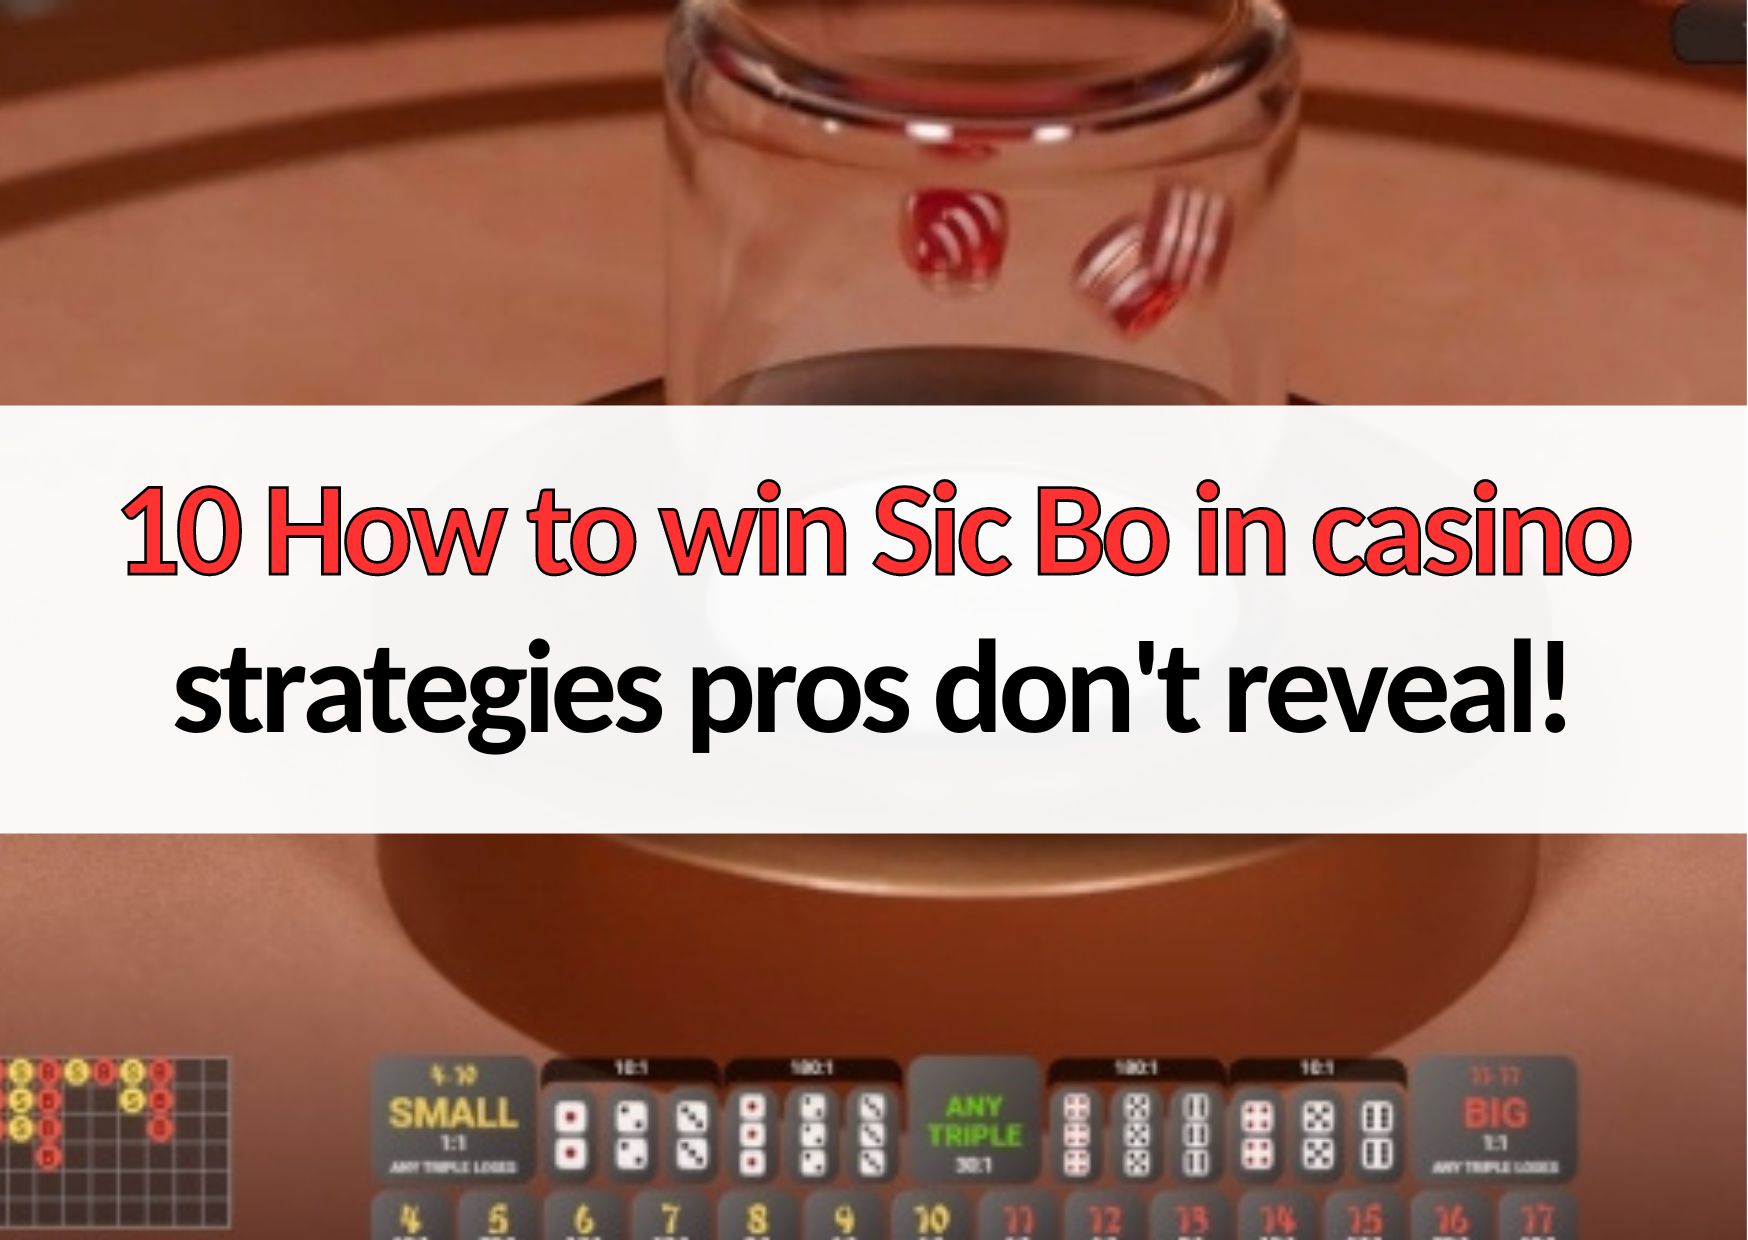 10 how to win sic bo in casino strategies revealed by experts